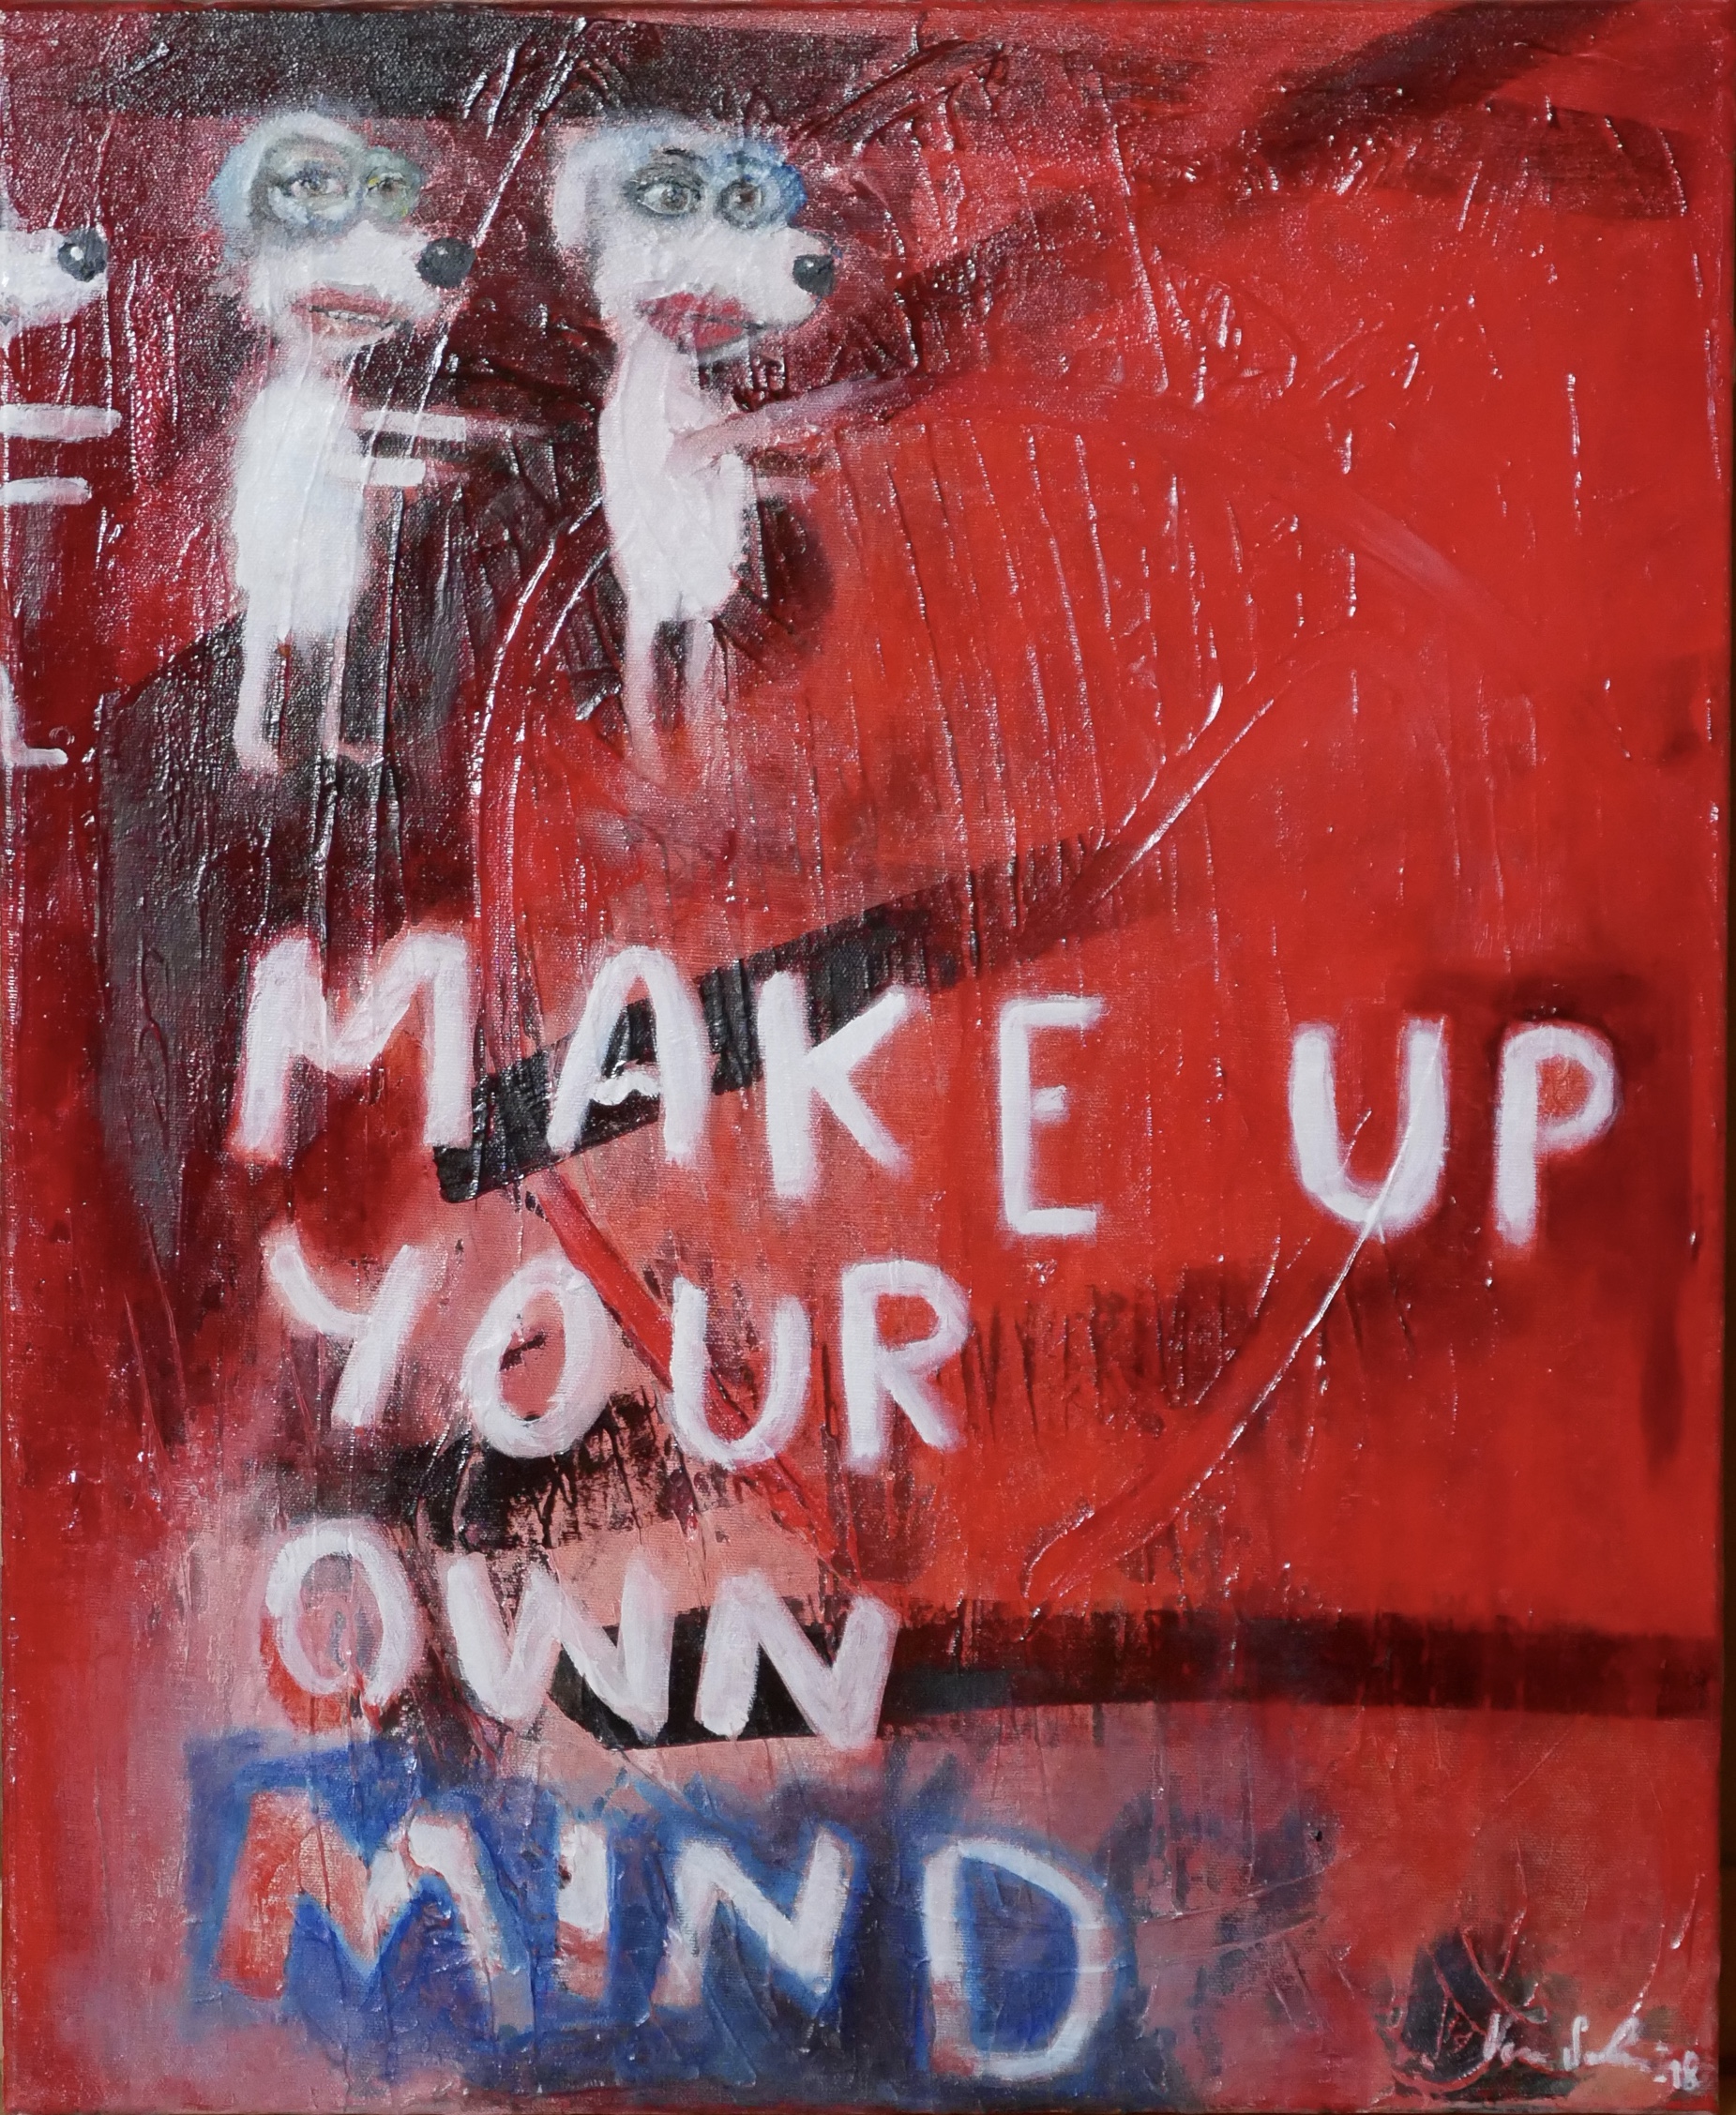 "Make up your own mind" 2018